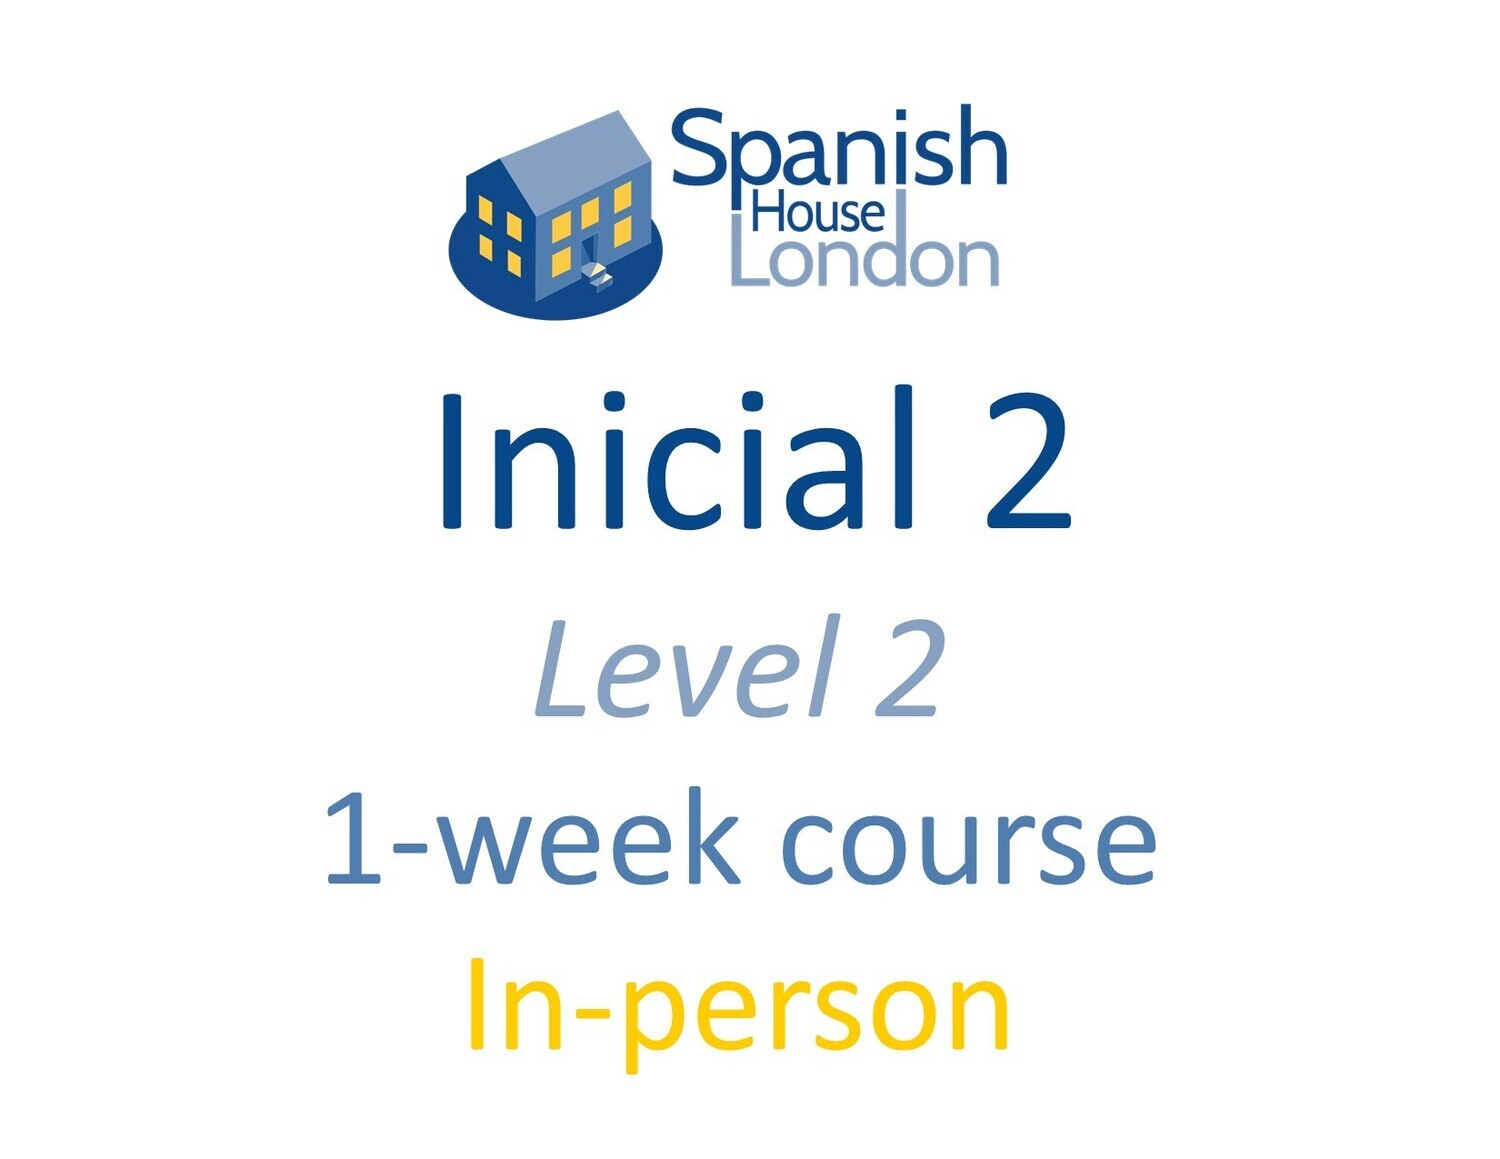 One-Week Intensive Inicial 2 Course starting on 16th January at 10.30am in Clapham North